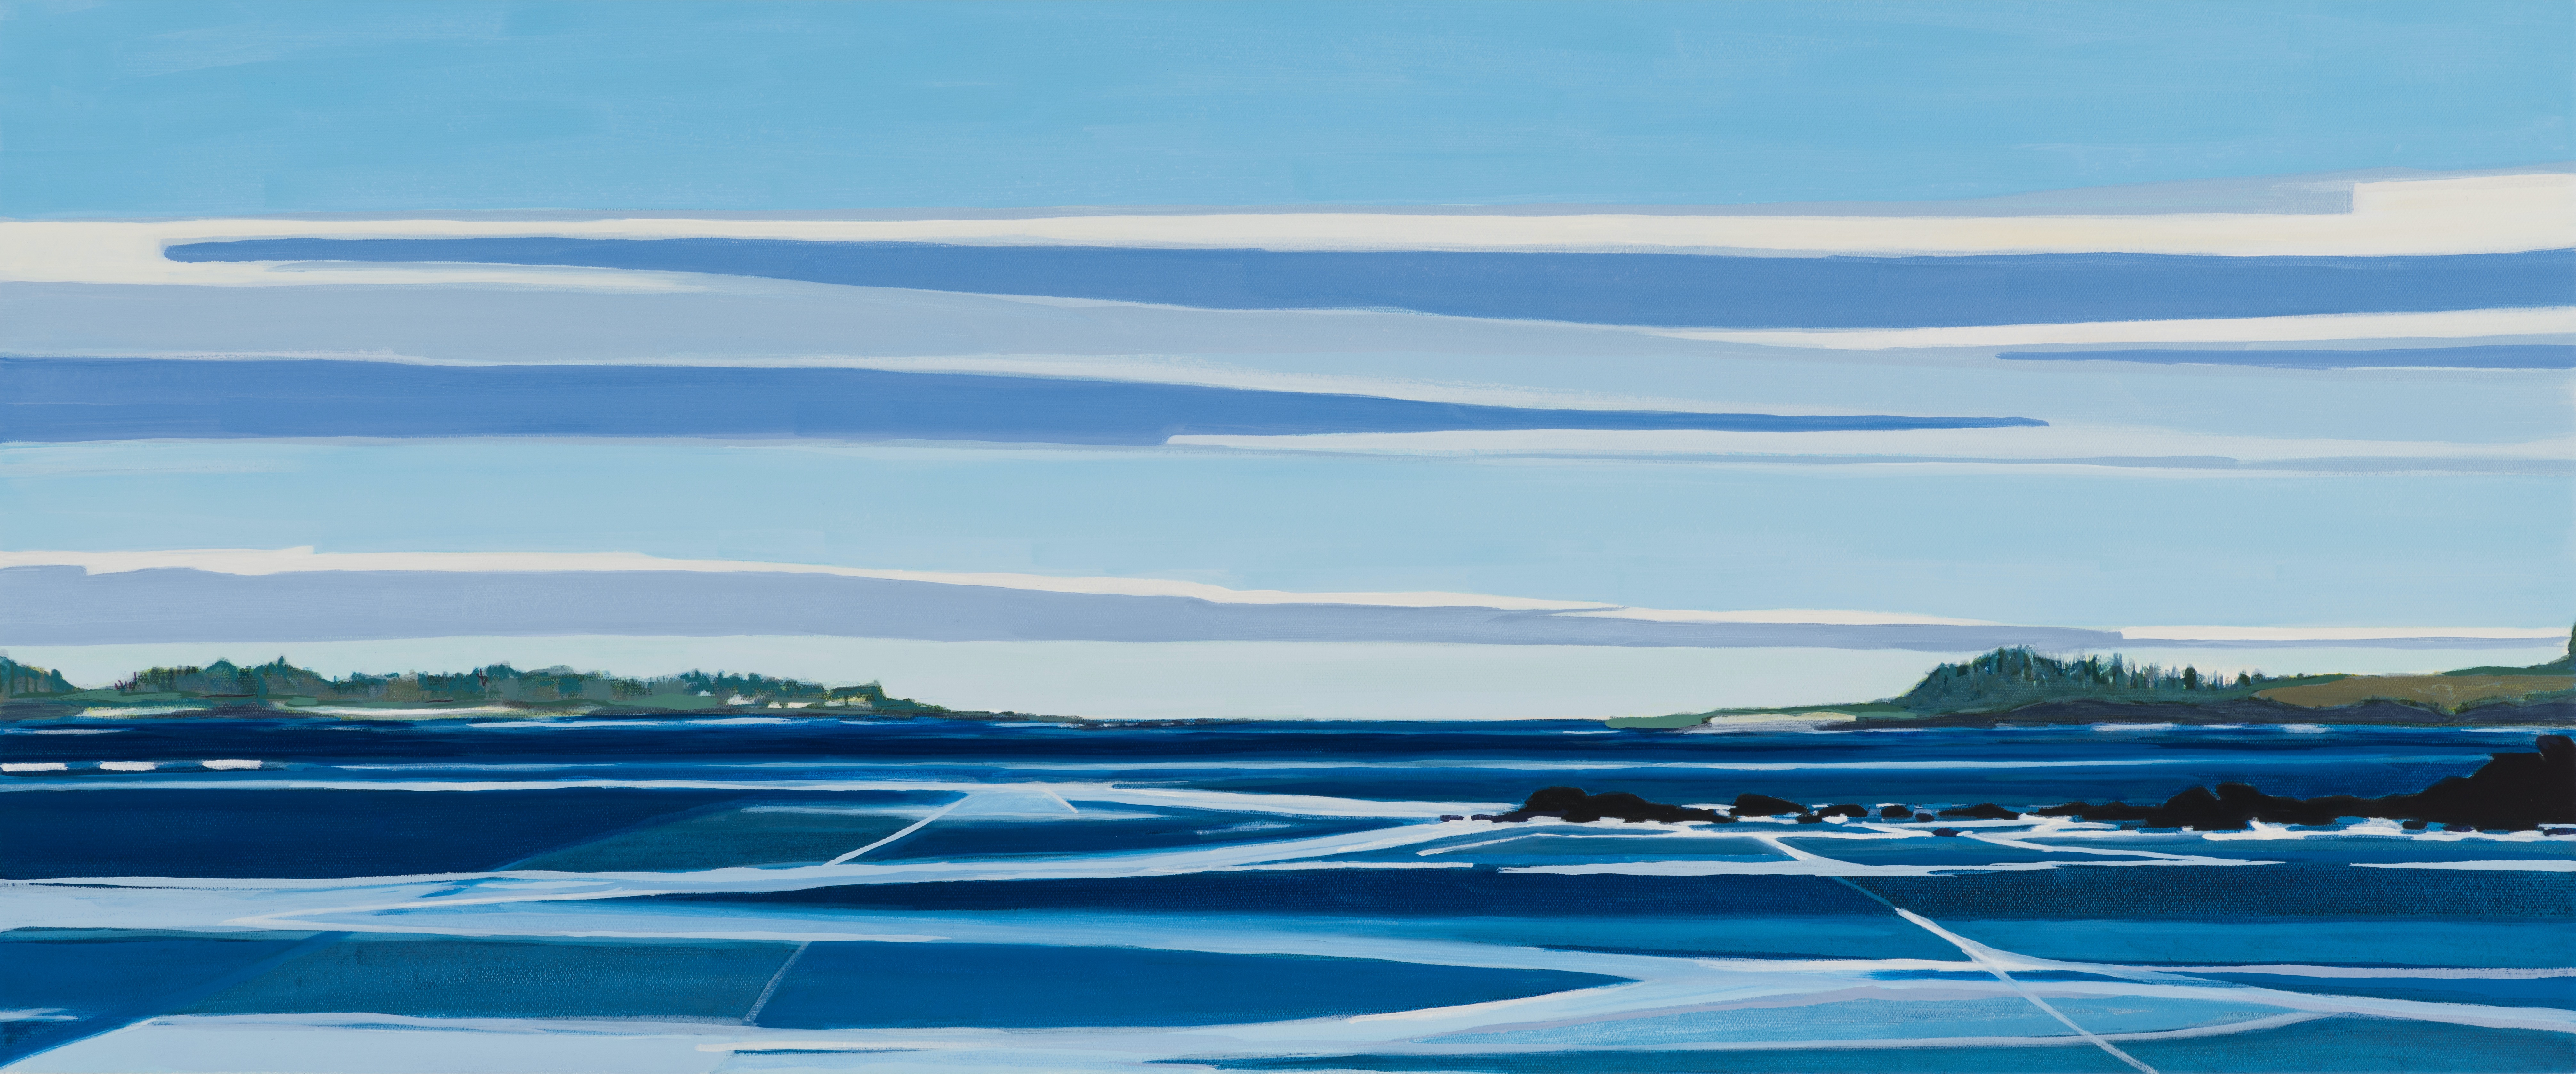 Wake, 12/28/19, 09:46, 43.535572, -70.314895, 2021, oil on canvas, 15 x 36 inches